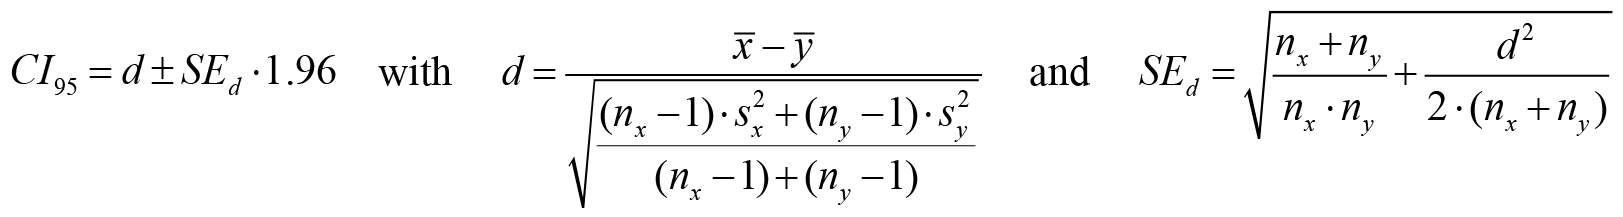 Equations for the confidence interval of effect size d, d, and the standard error of d. More description above.